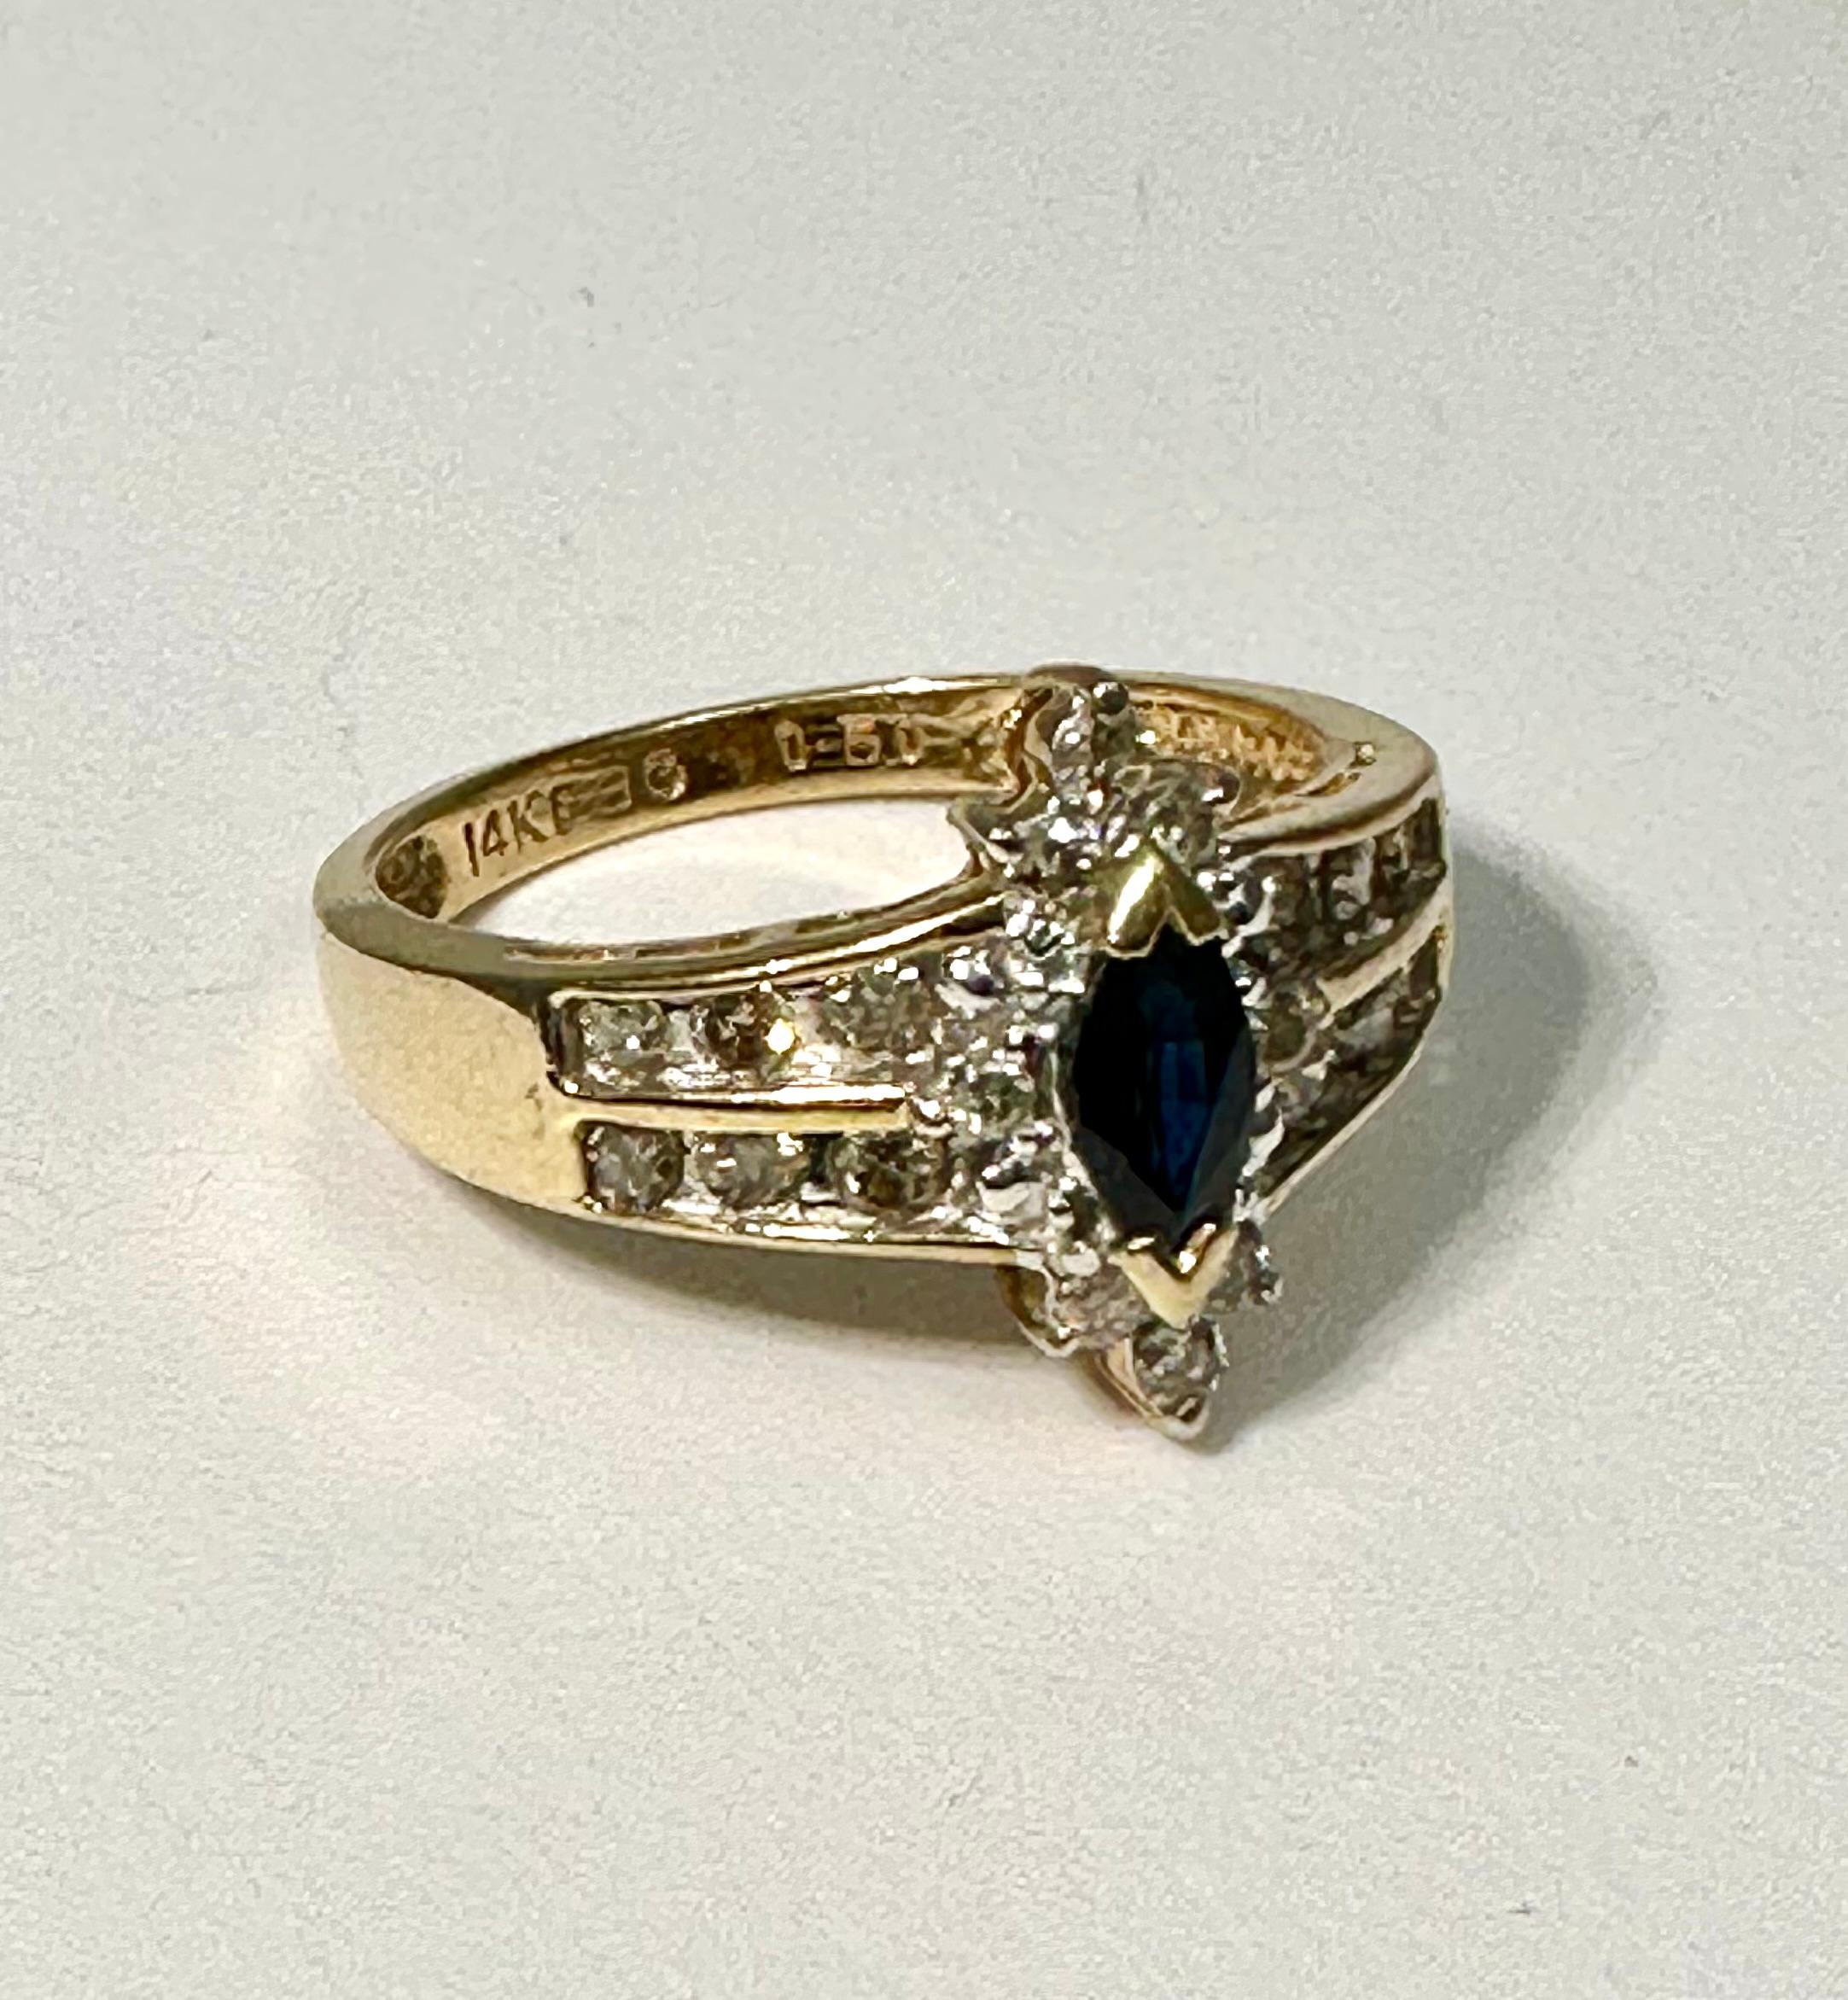 14k Yellow Gold ~ 3mm x 5mm Marquise Sapphire with 20 Diamonds Ring ~ Sz 7 1/2

Meaning: Sapphire is a stone of wisdom and royalty, often associated with sacred things and considered the gem of gems, guiding individuals to an enlightened